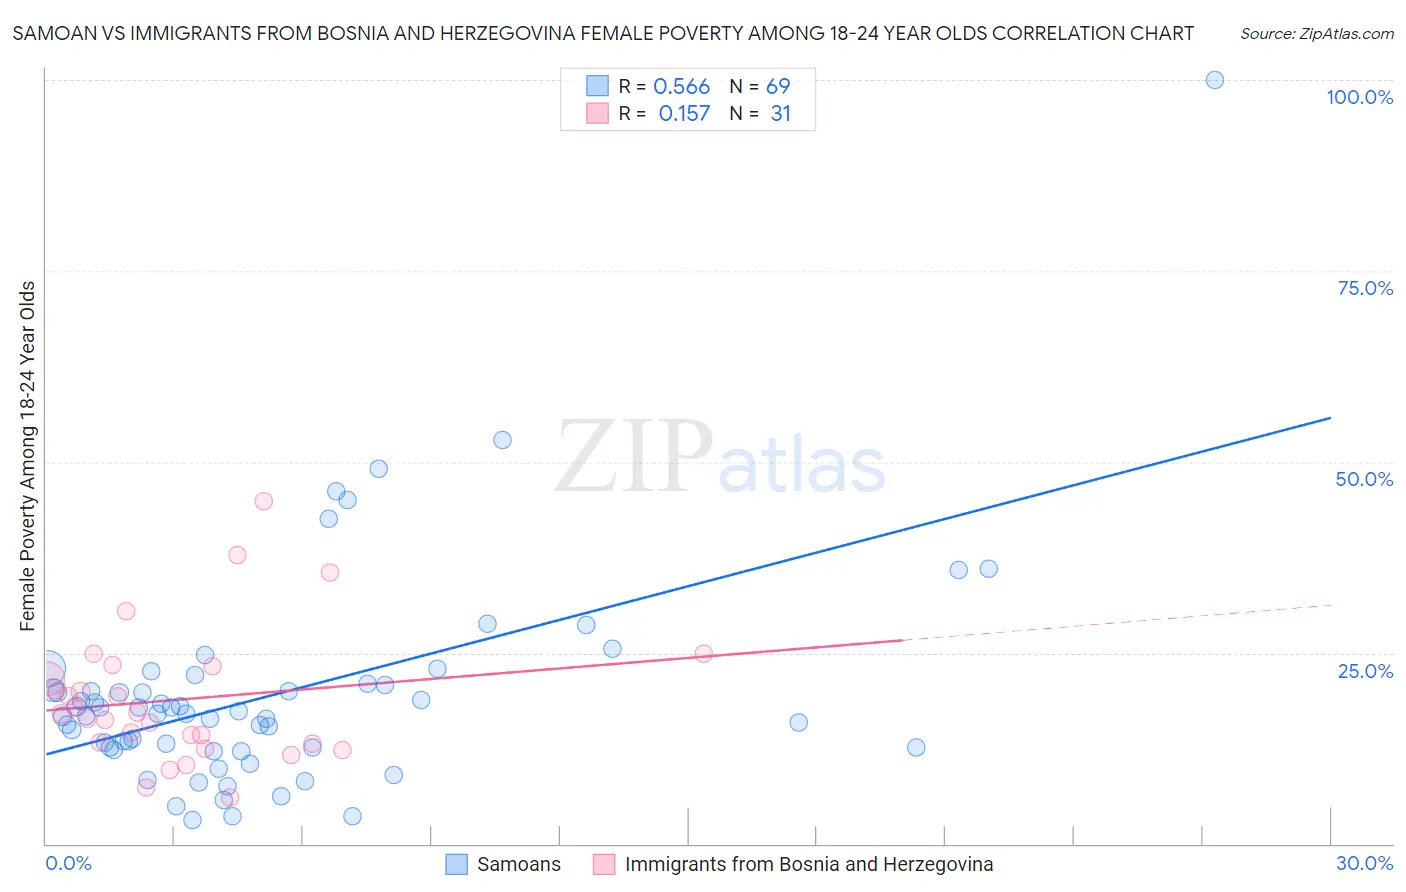 Samoan vs Immigrants from Bosnia and Herzegovina Female Poverty Among 18-24 Year Olds